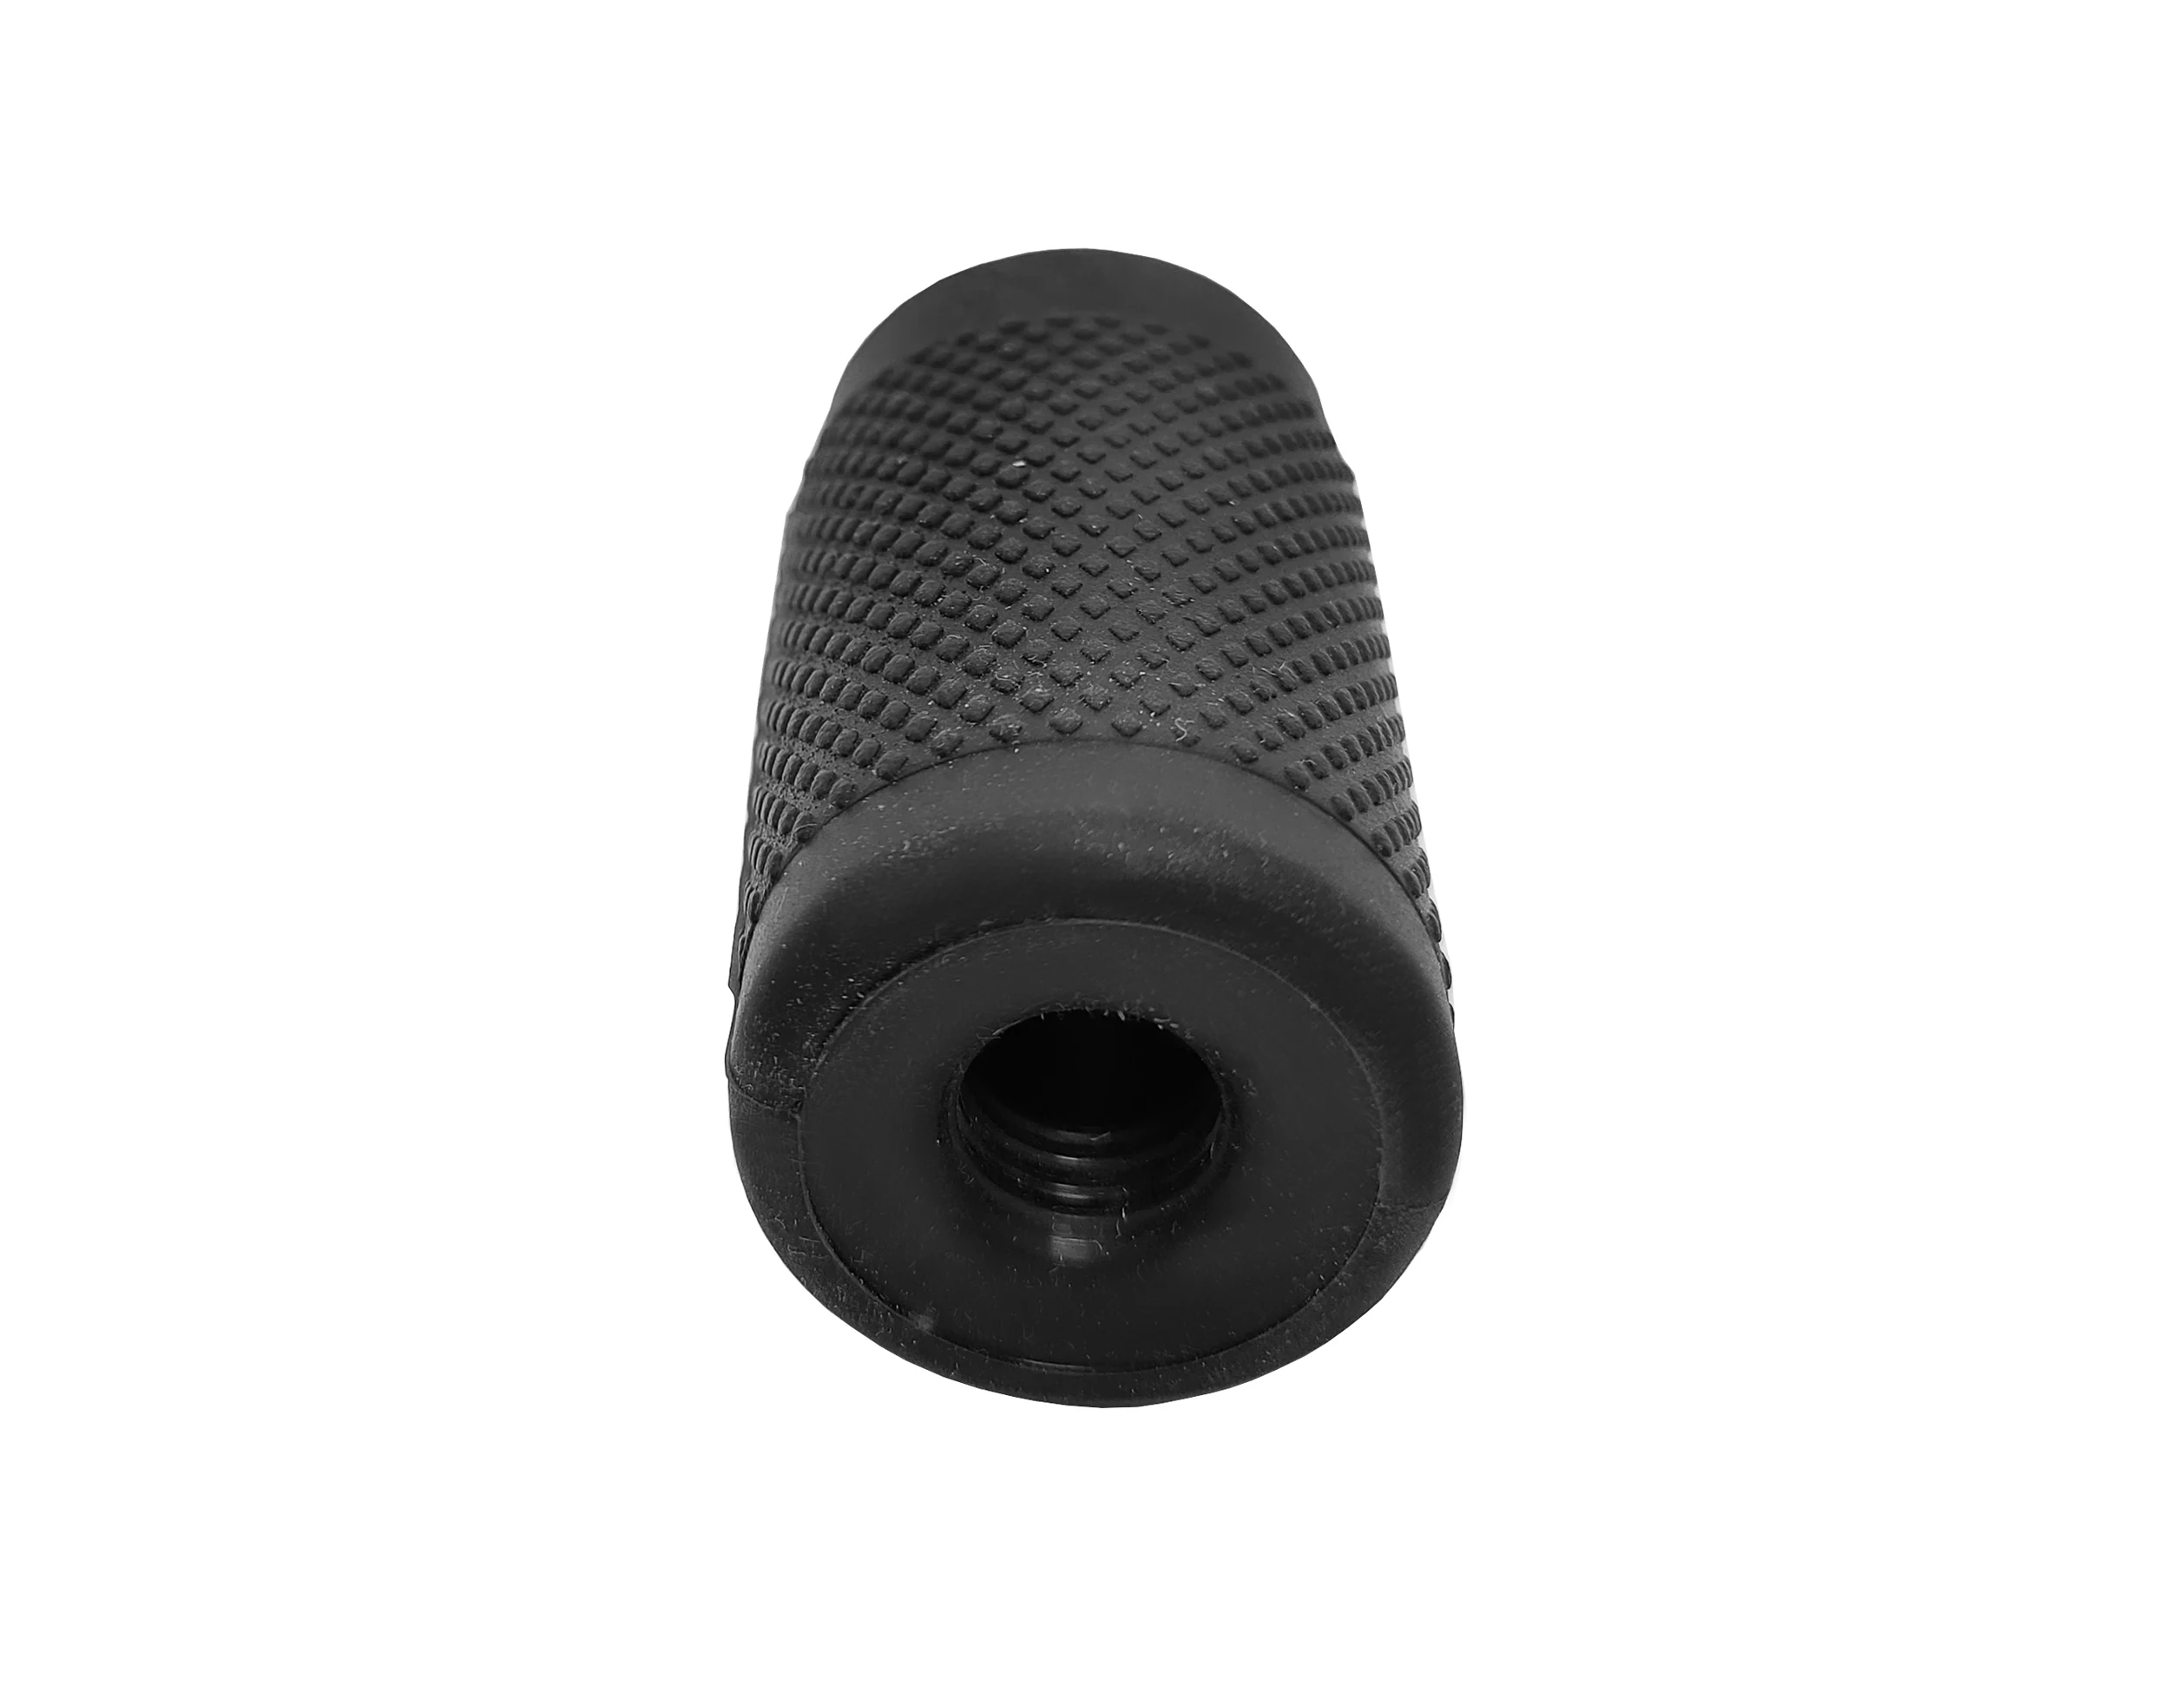 Waterproof silicone connector rubber Boots for 4.310 Din male plug Connector for 1/2 cable Boots manufacture